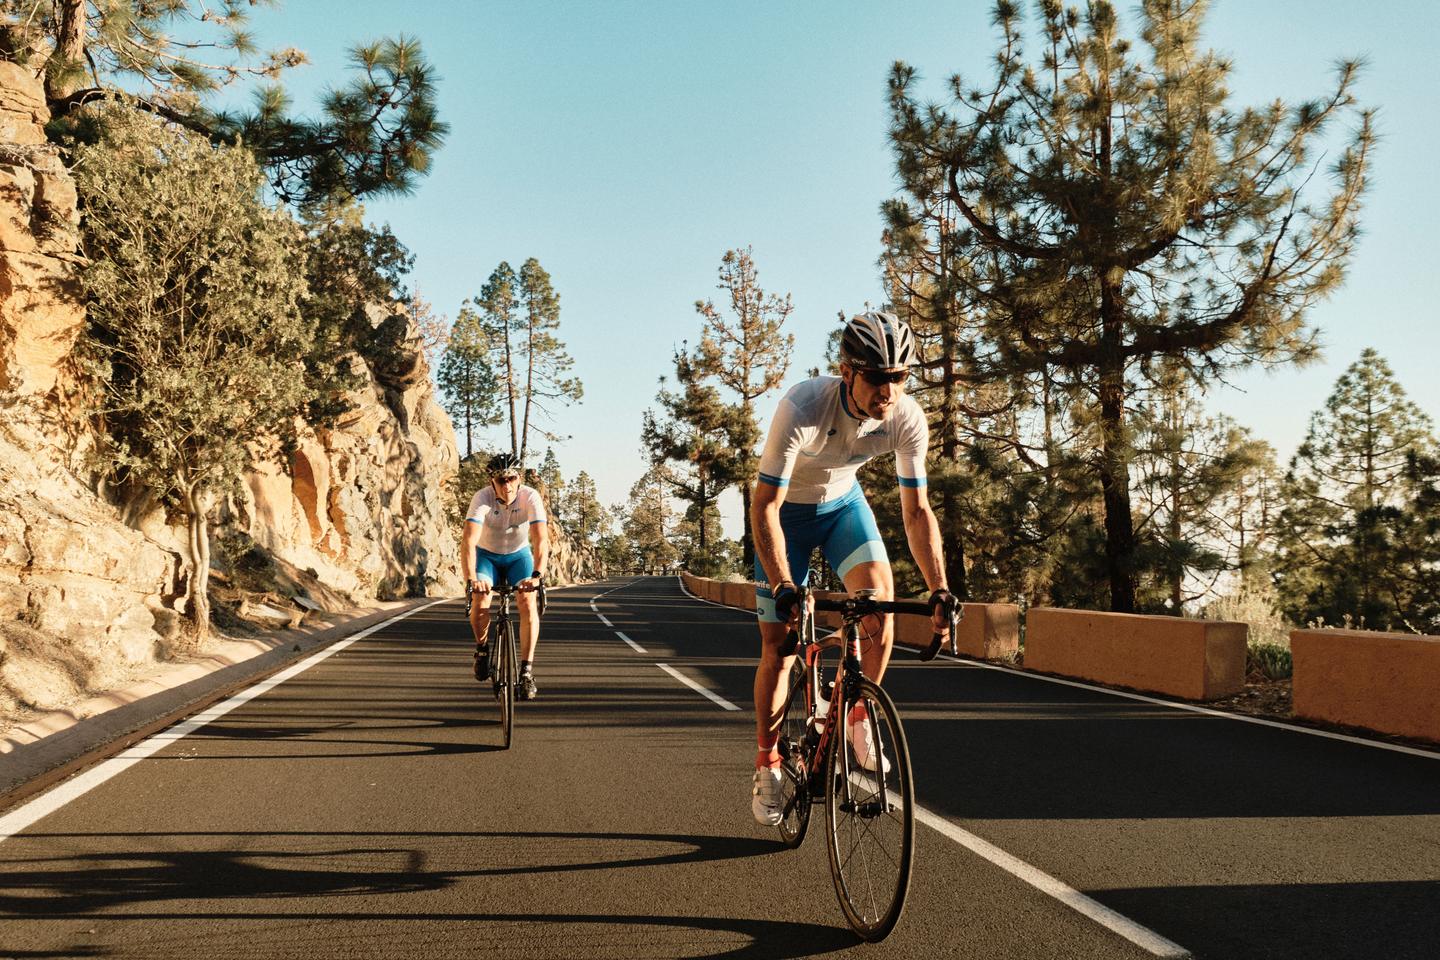 Cyclists ascending a winding mountain road in Tenerife, with a backdrop of pine trees and rocky outcrops under a clear sky.